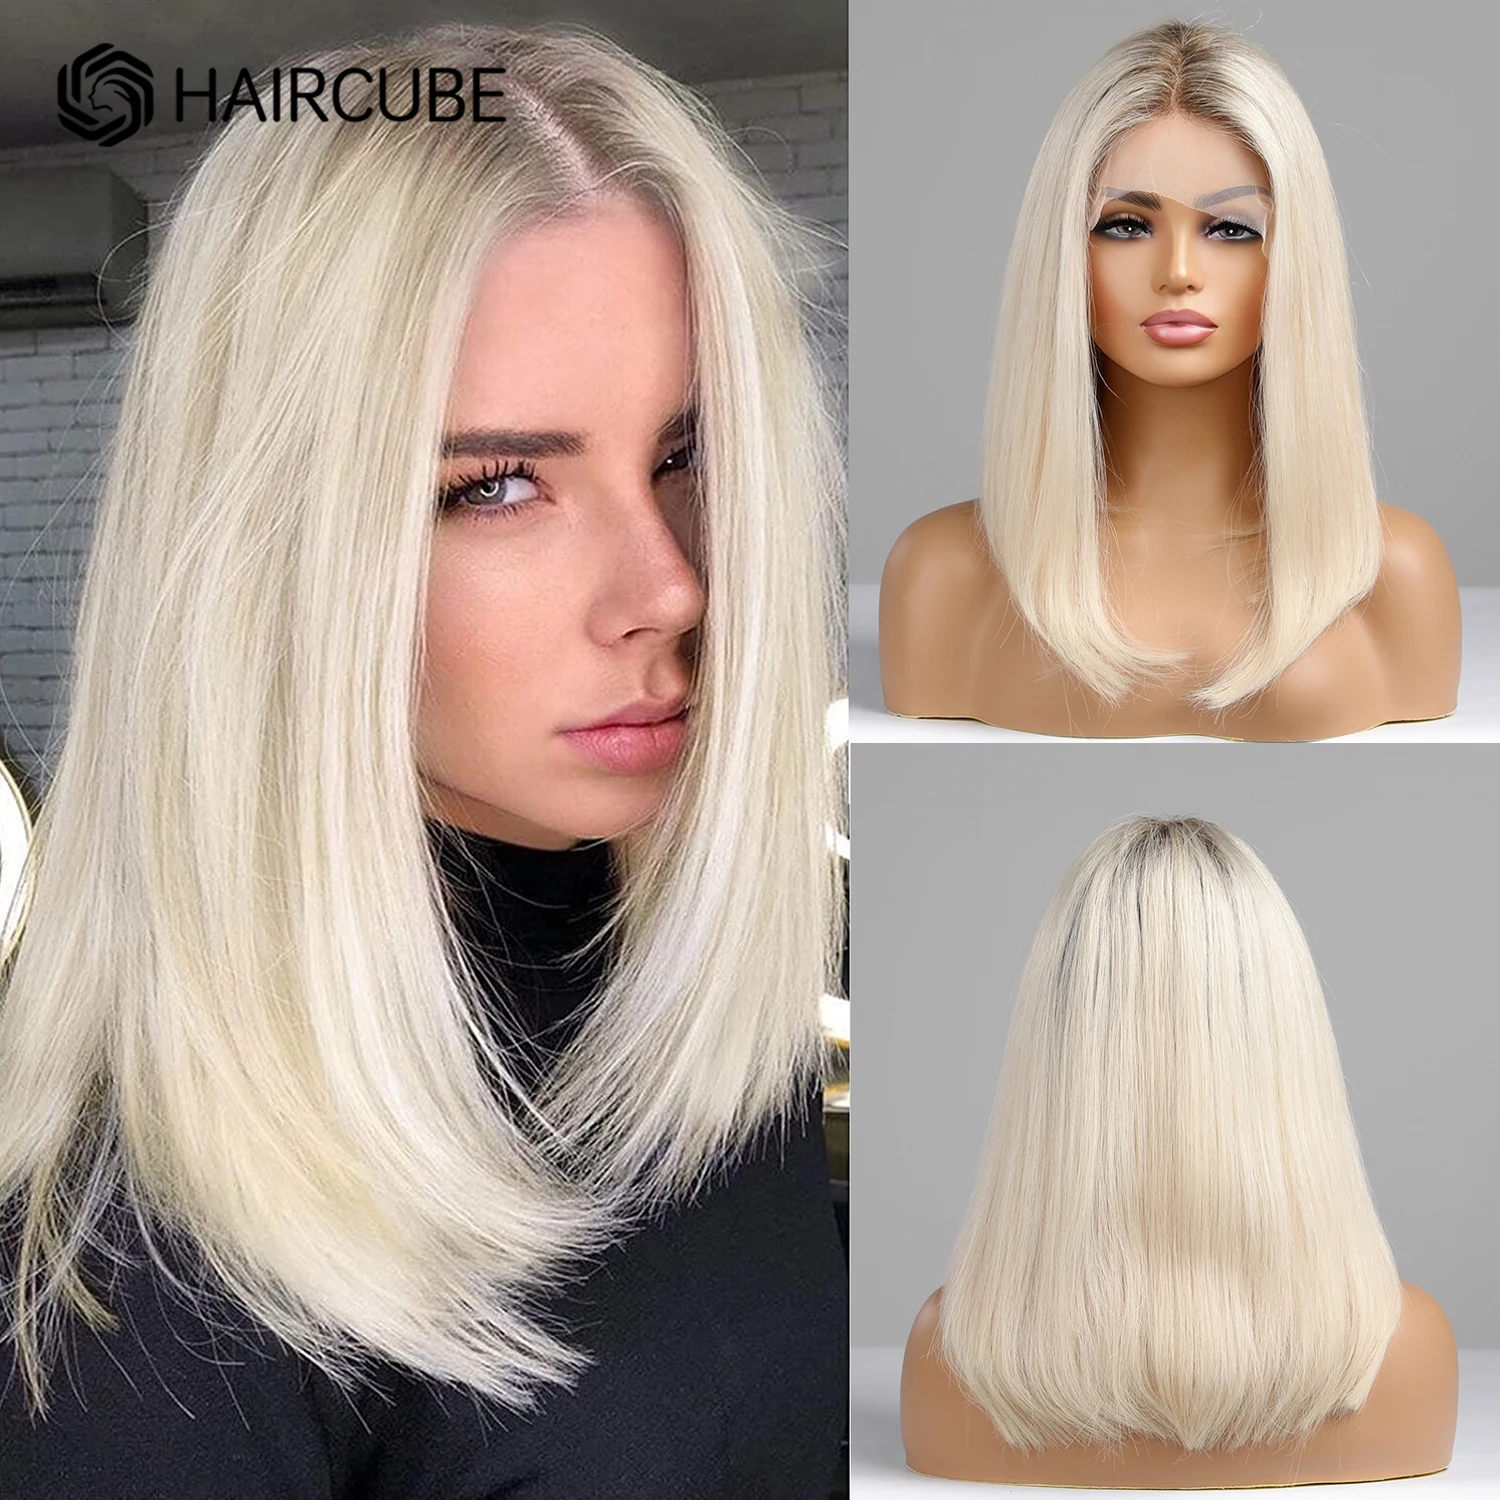 Platinum Blonde Lace Front Human Hair Wig for Women 14 Inches Straight Natural Hair With Dark Roots Short Bob 13x1 Lace Wigs